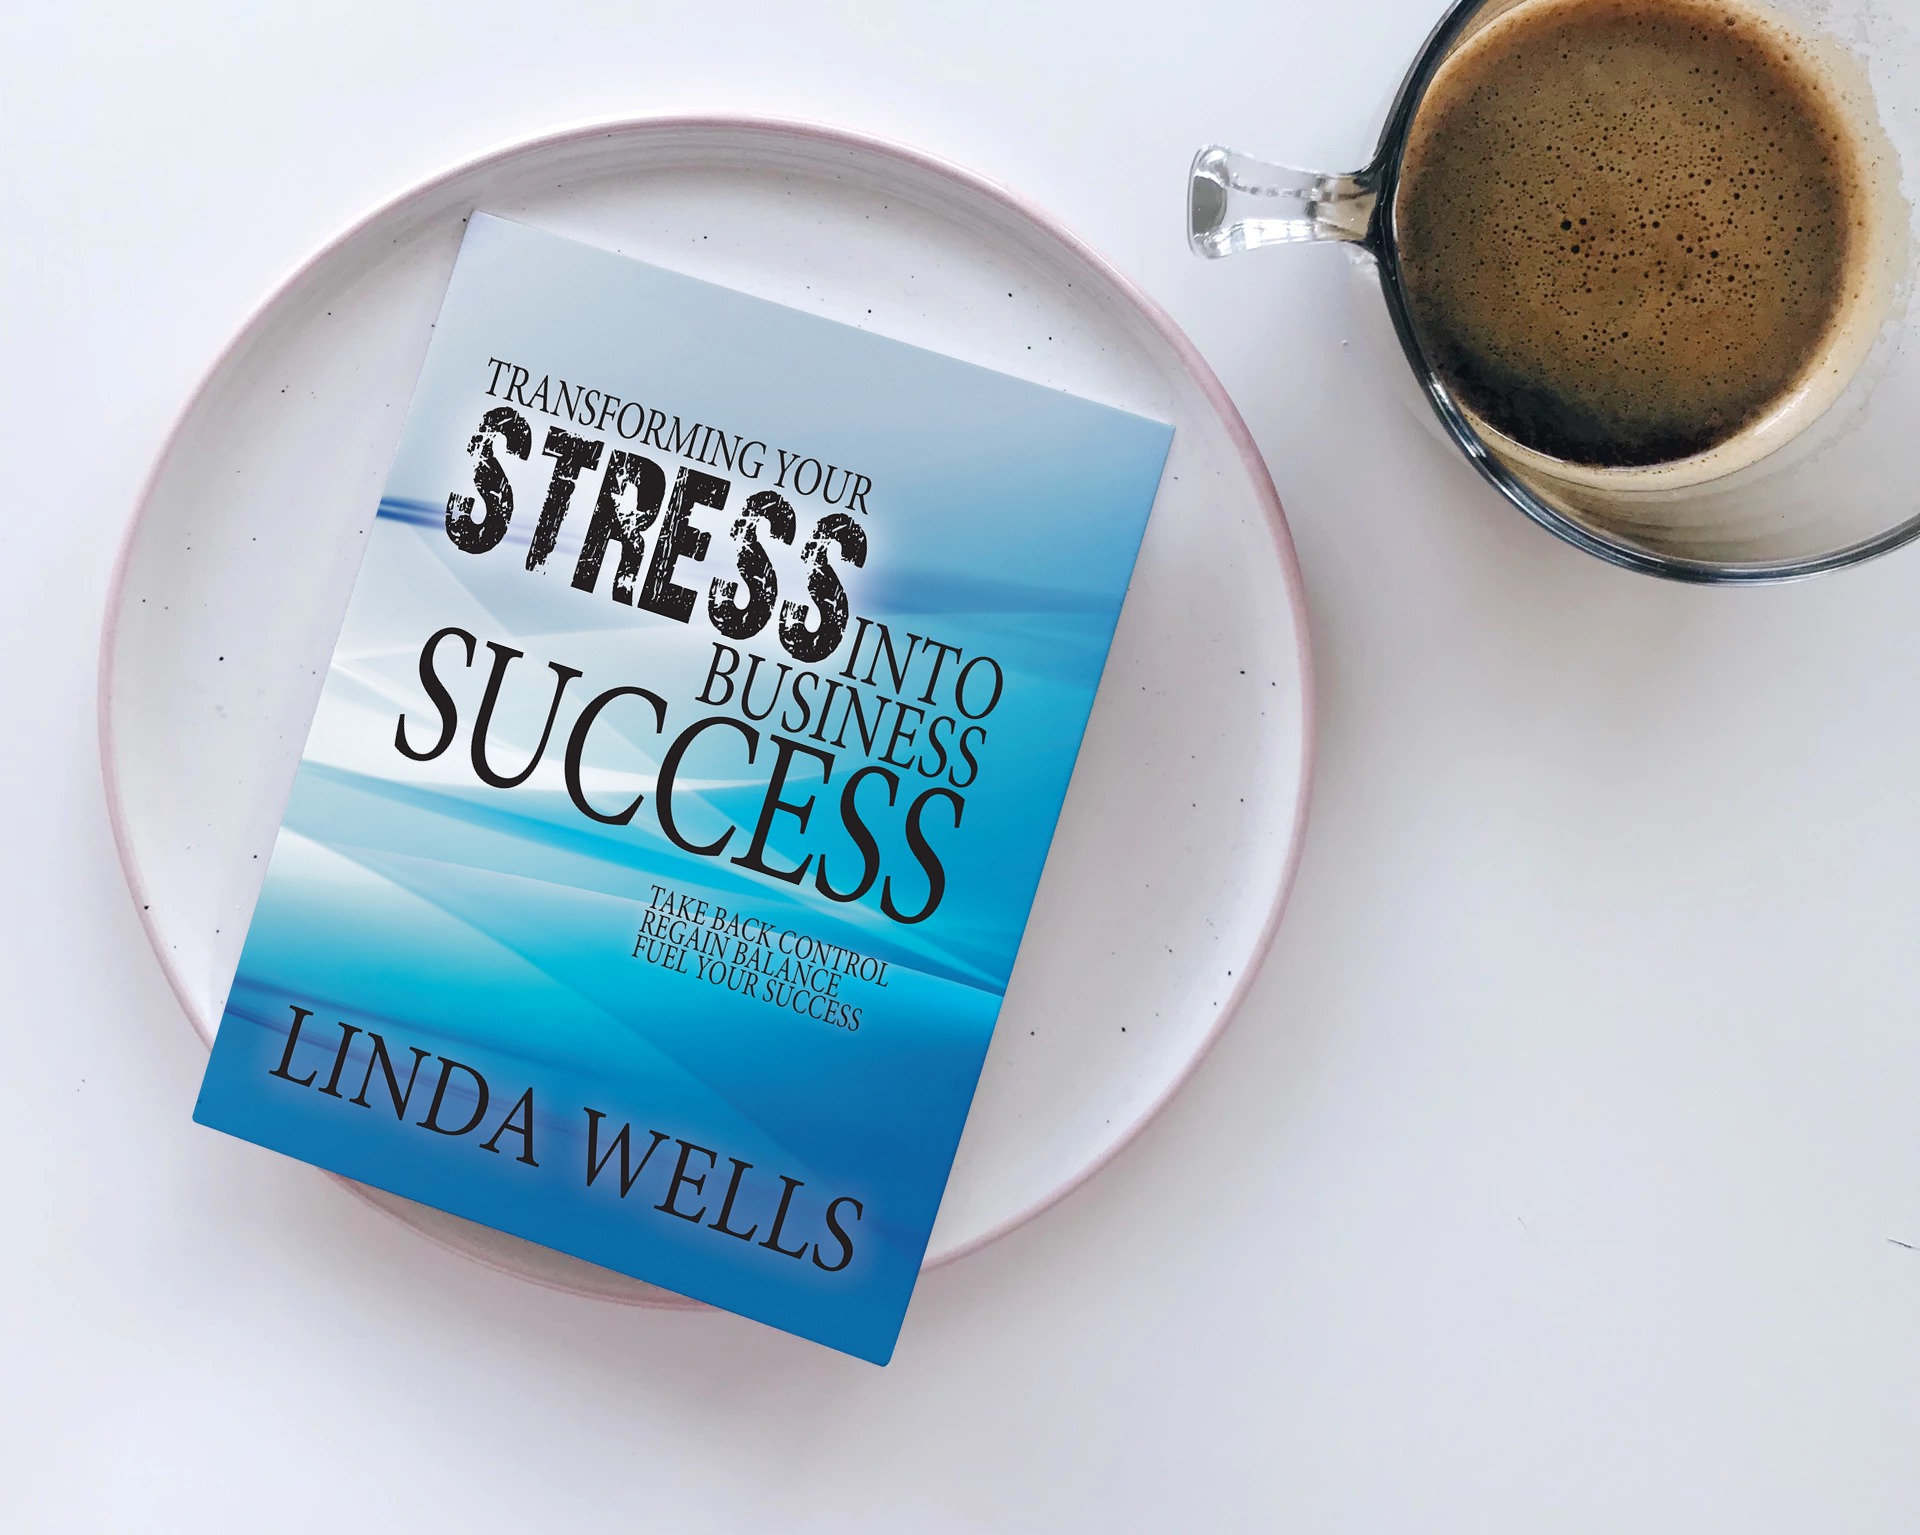 Linda Wells book on business wellbeing and stress